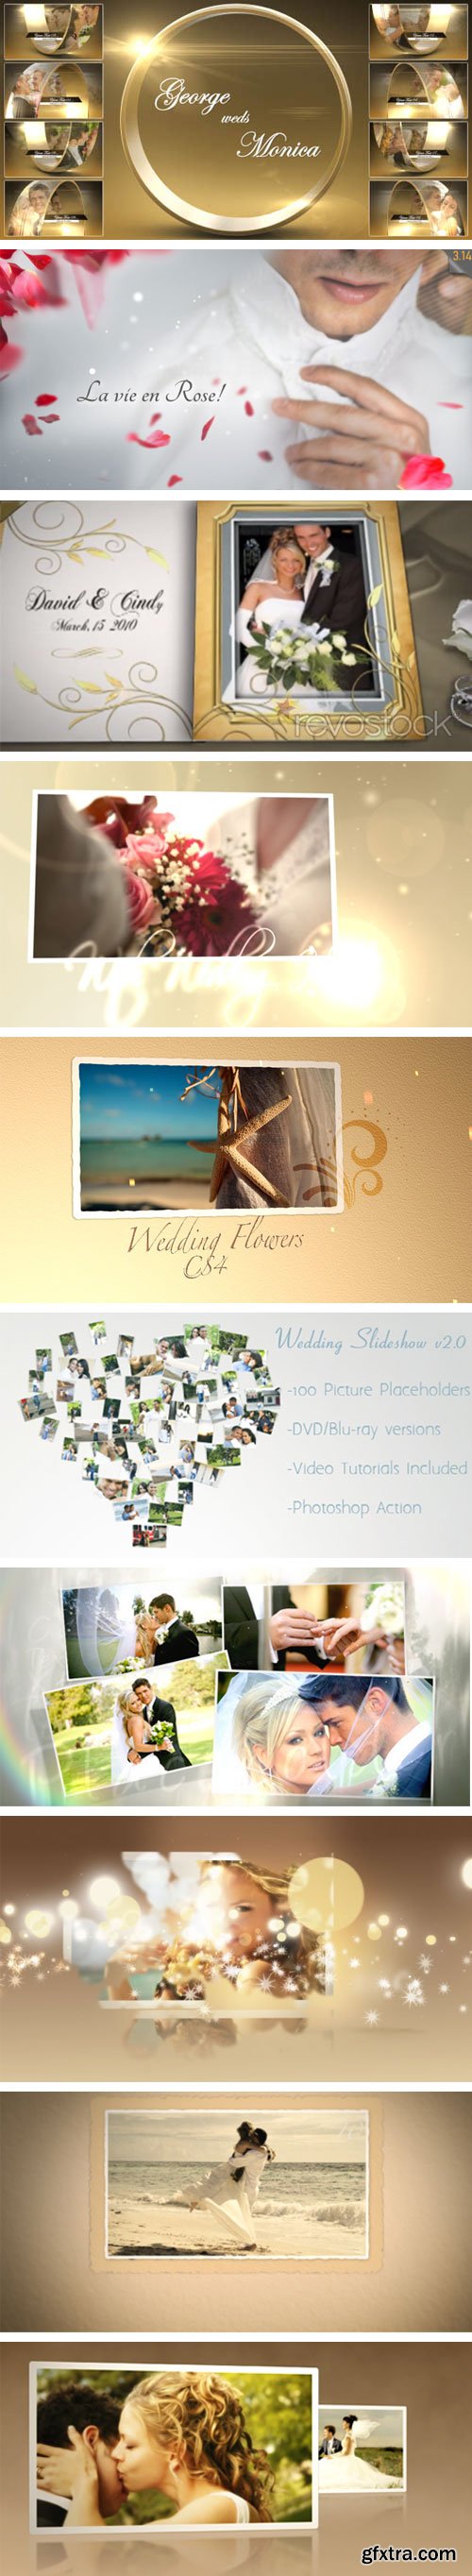 VideoHive - 10 Template Wedding Project After Effect Bundle